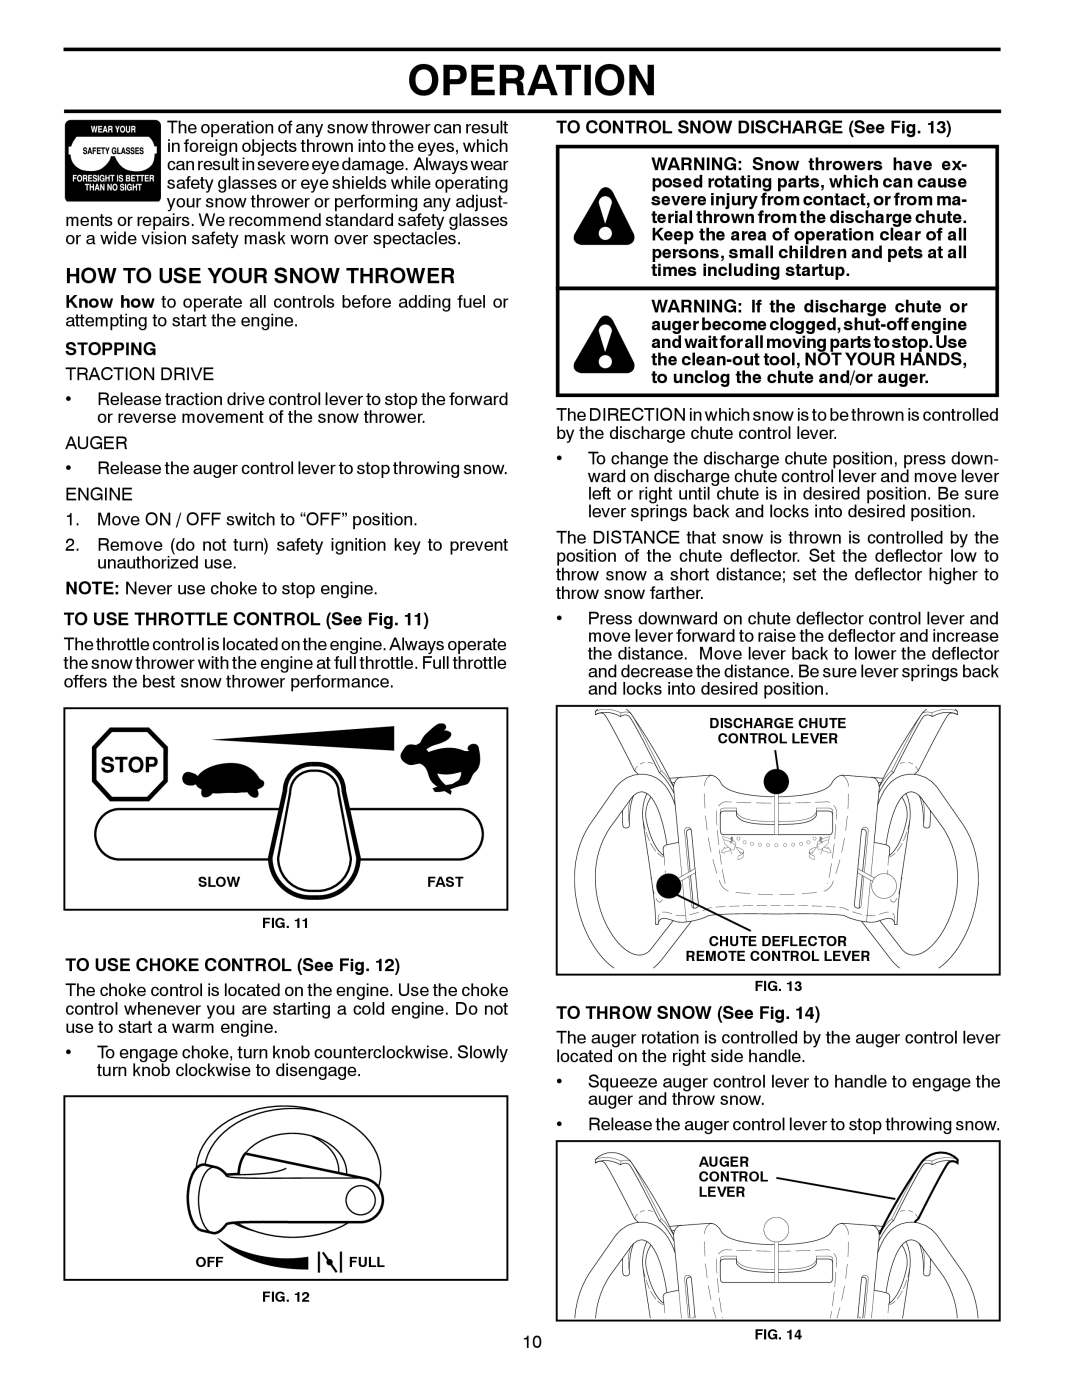 Husqvarna 10527SB-LS owner manual How To Use Your Snow Thrower, Operation, Stopping, TO USE THROTTLE CONTROL See Fig 